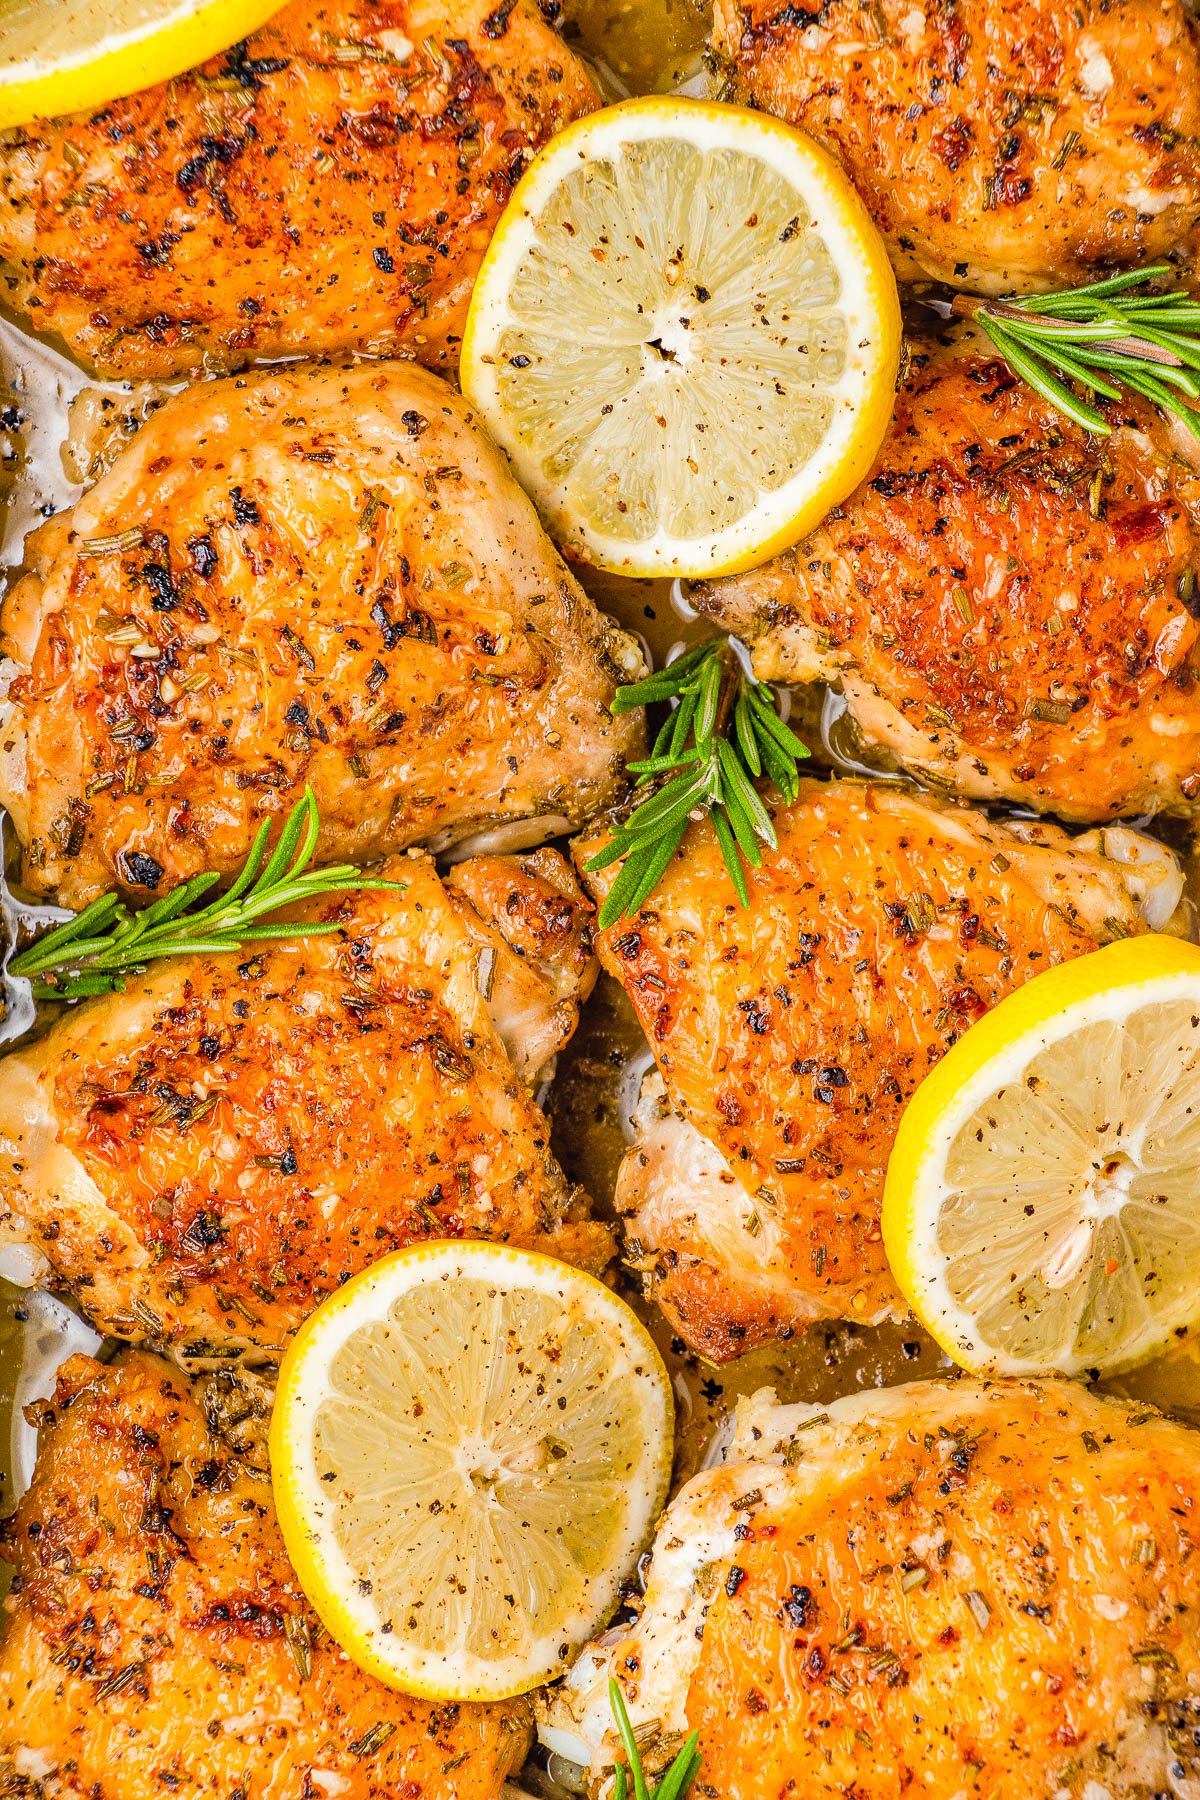 Baked Lemon Rosemary Chicken — Just five basic ingredients are all you need to make this EASY recipe! Chicken thighs are seared until golden, then coated with a zingy lemon rosemary marinade and baked. The skin crisps up in the oven while the chicken remains moist and tender! Serve with a side salad, roasted veggies, or mashed potatoes for a full meal! 